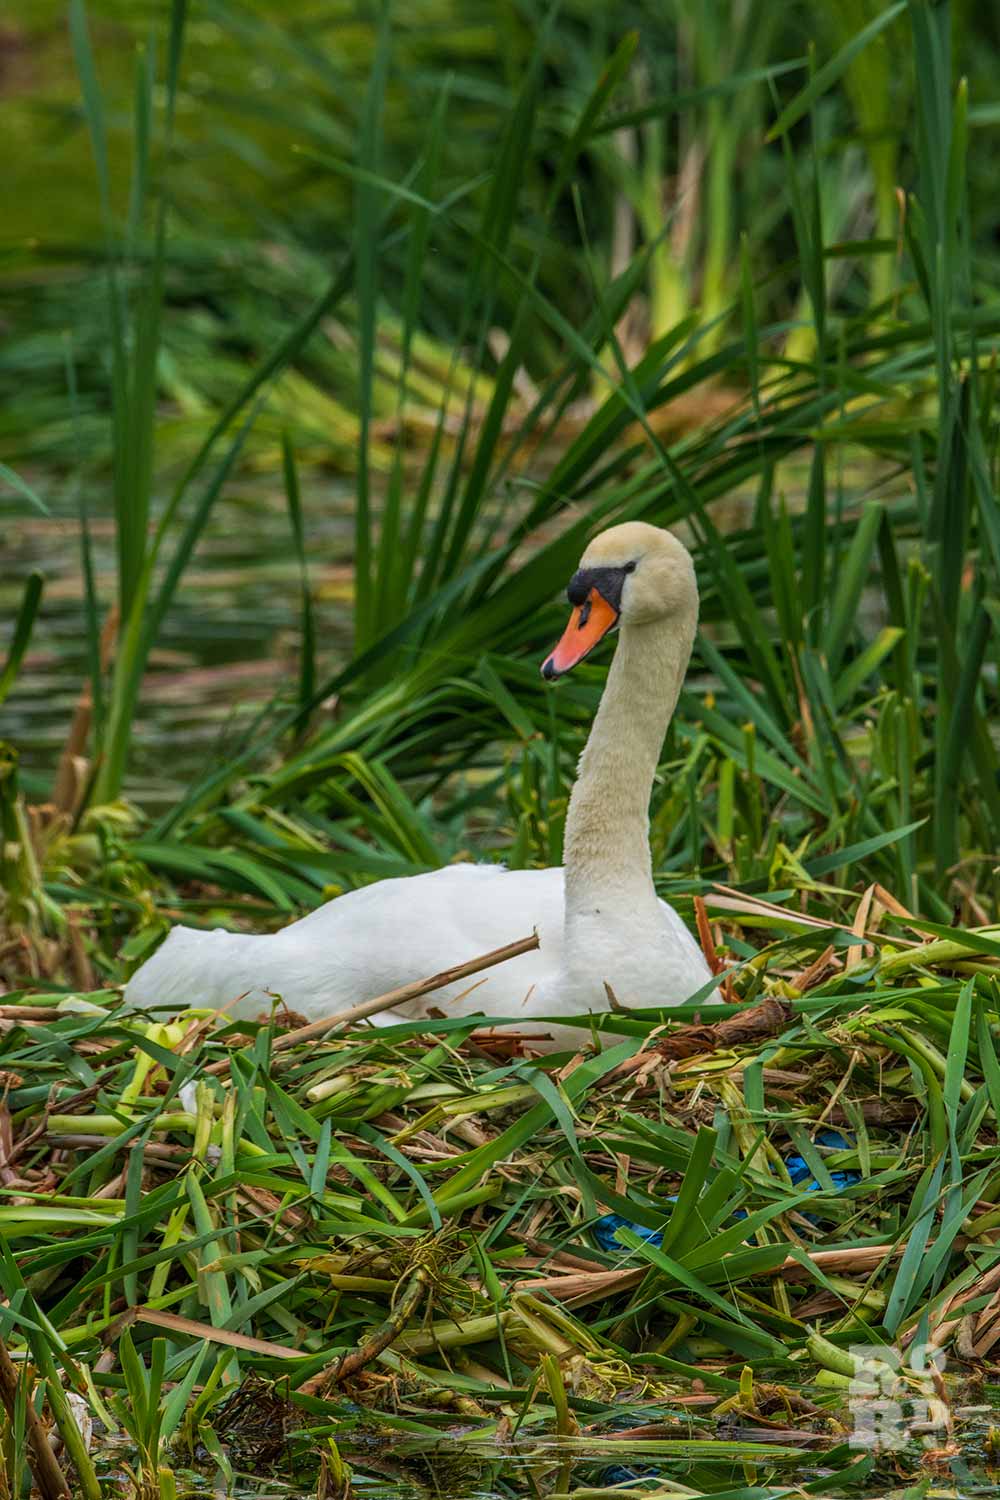 A swan, nesting in reeds in Victoria Park, Tower Hamlets, East London.